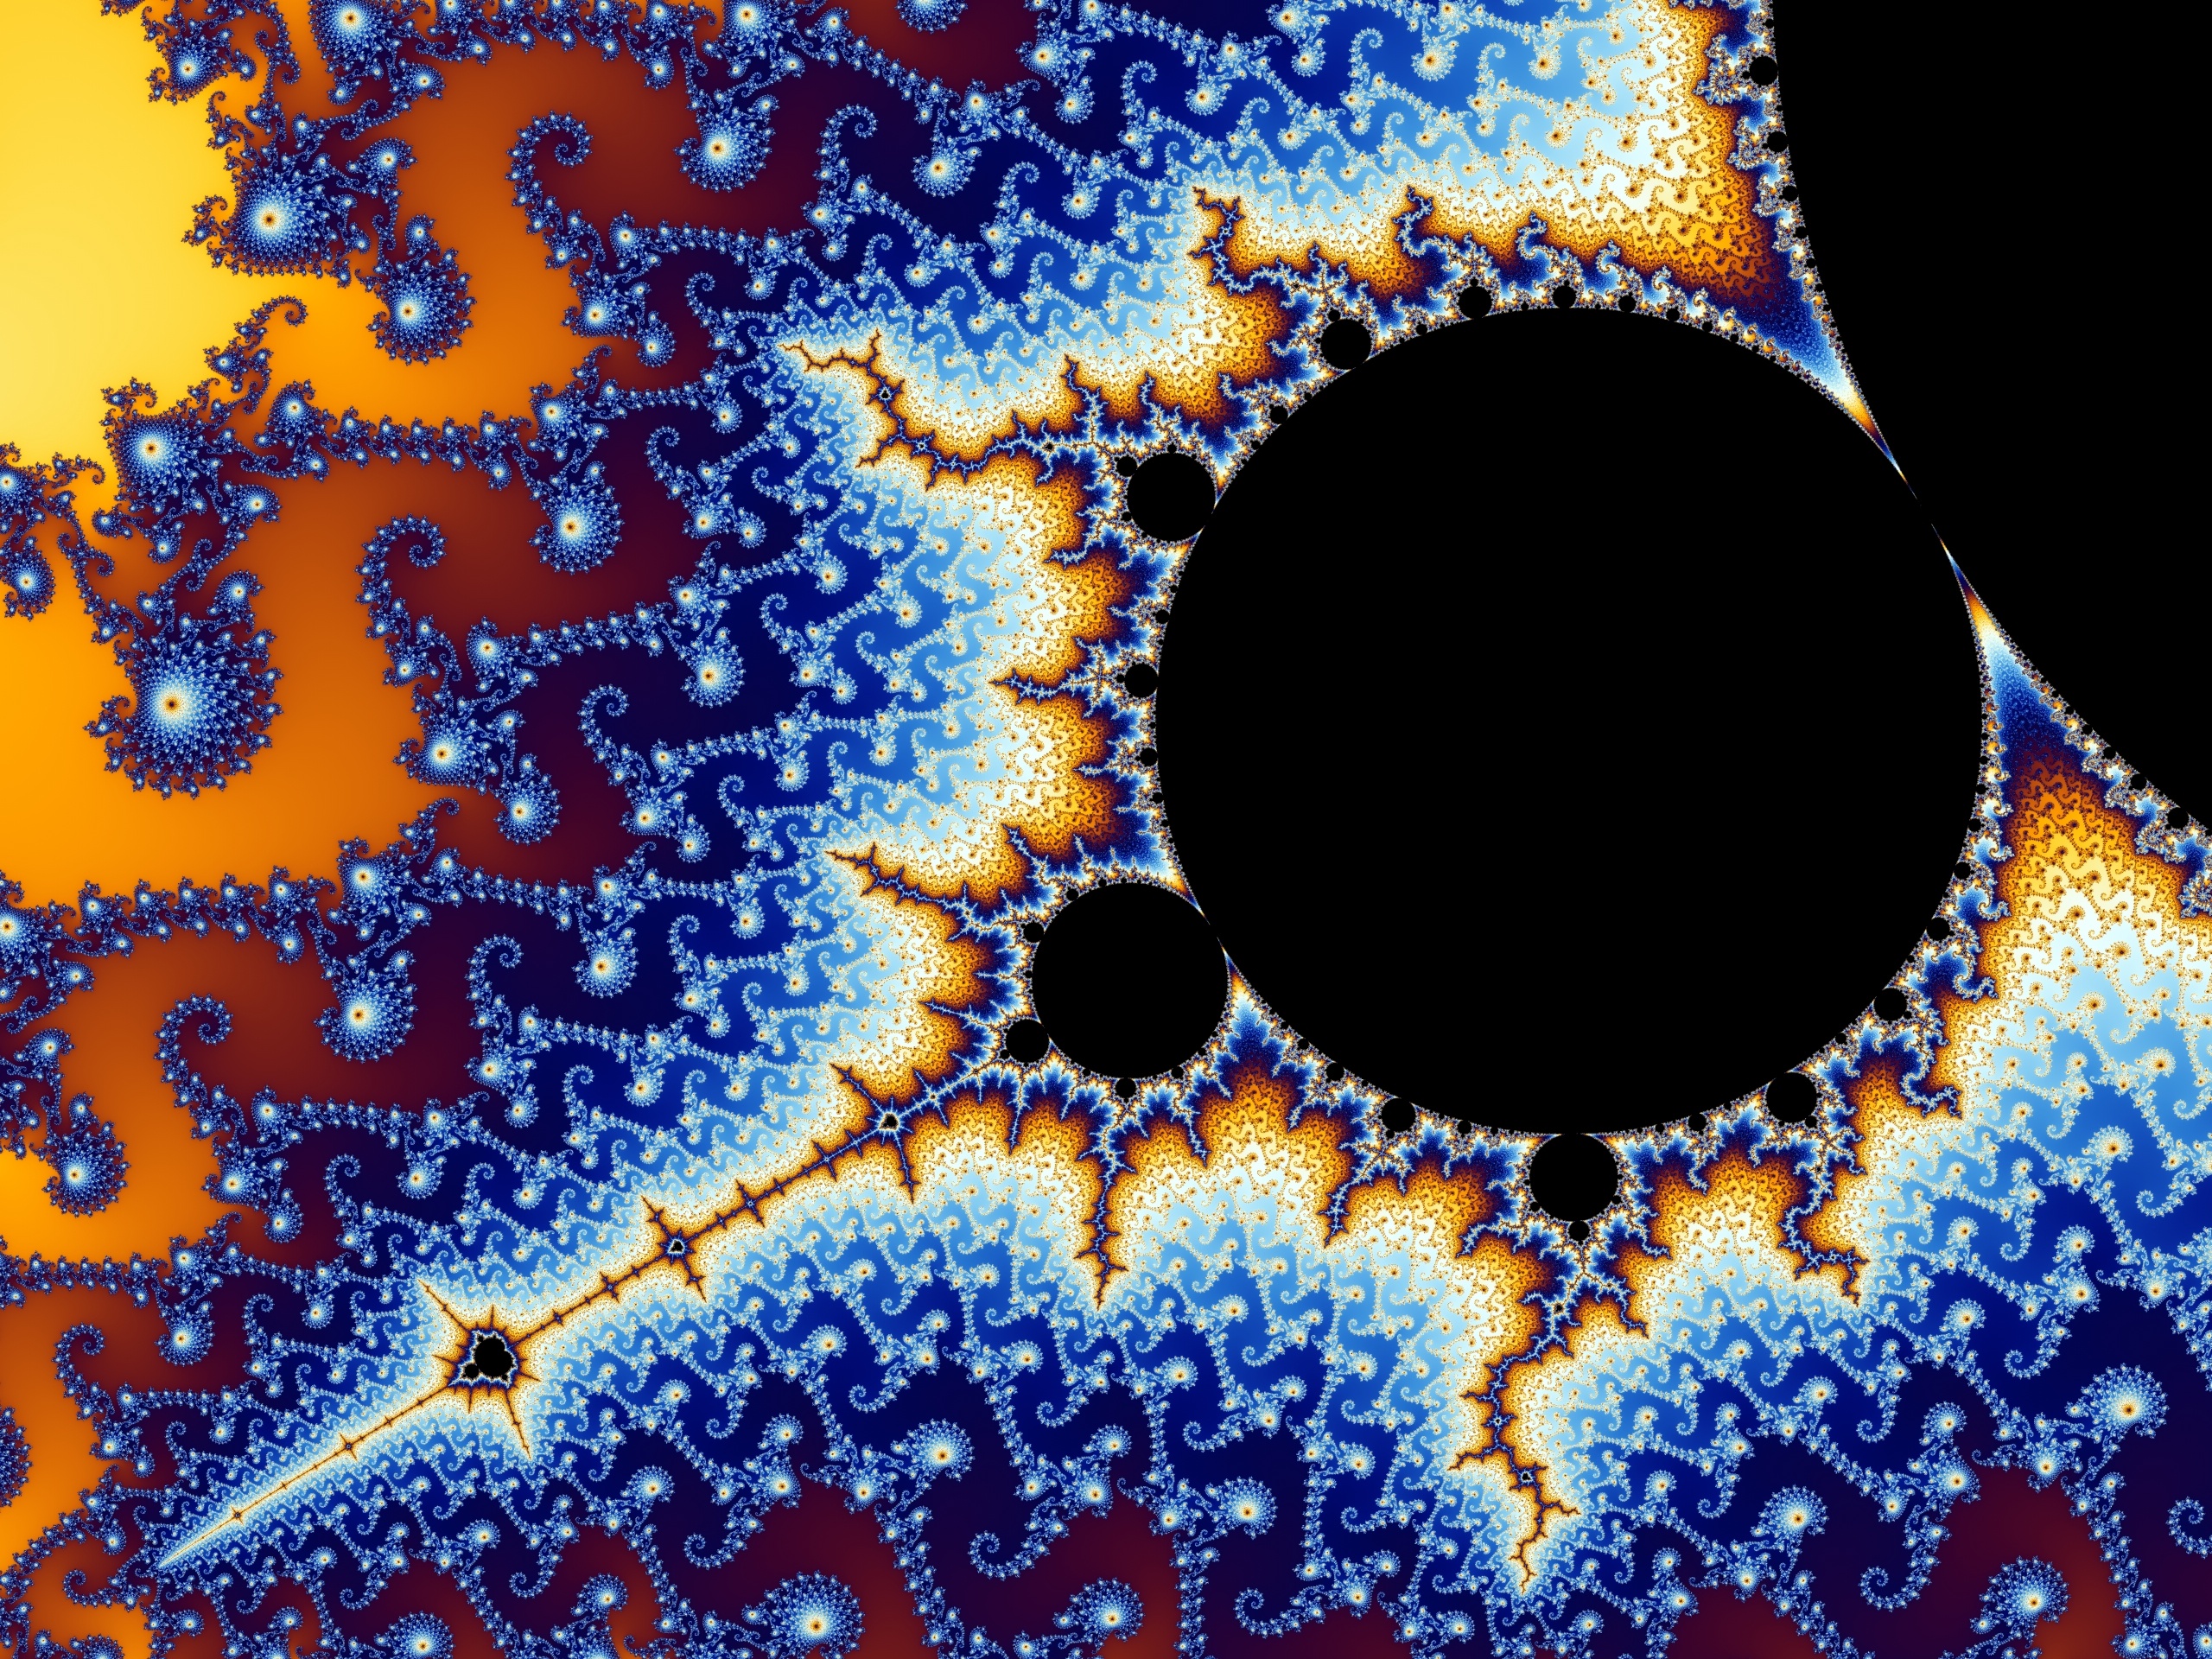 Abstract fractal wallpapers, High-quality visuals, HQ images, Stunning backgrounds, 2560x1920 HD Desktop